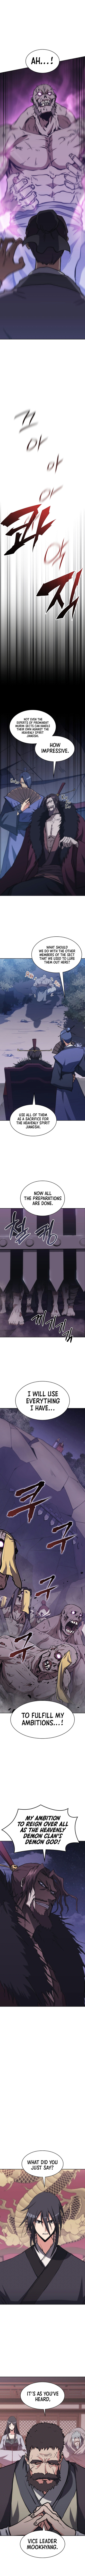 MookHyang - The Origin - Chapter 40 Page 6